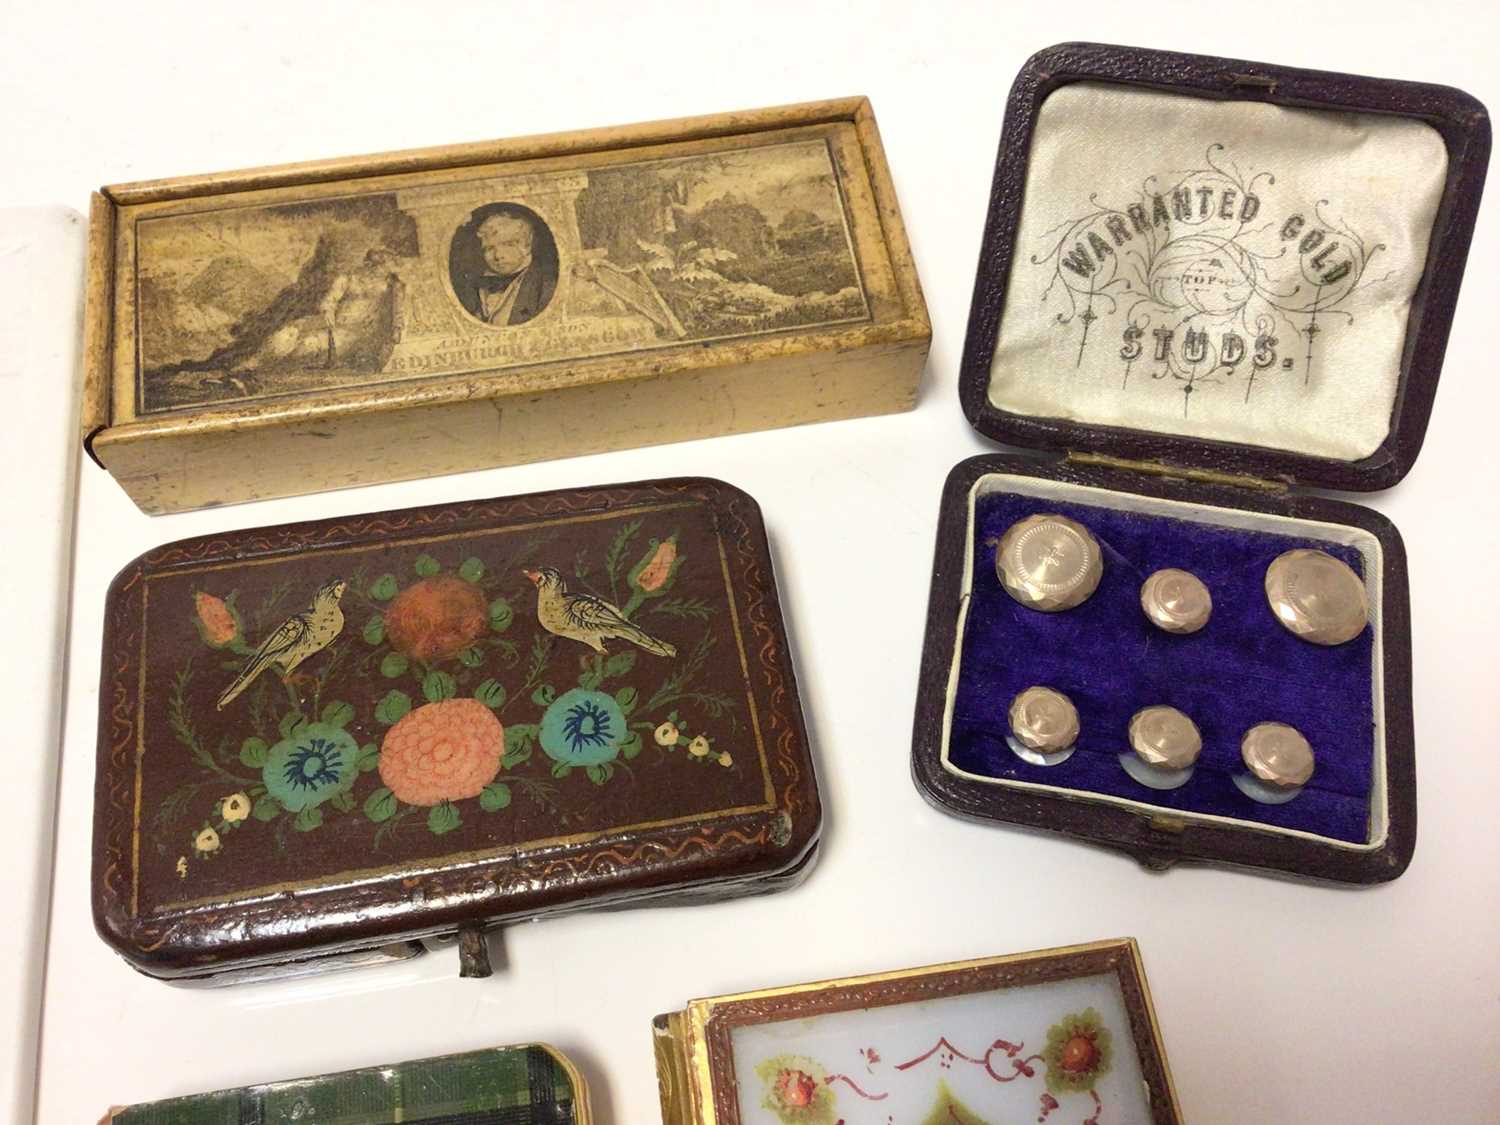 Two 19th century Lornettes, silver model goose , Eastern cosmetic box and works of art - Image 7 of 7